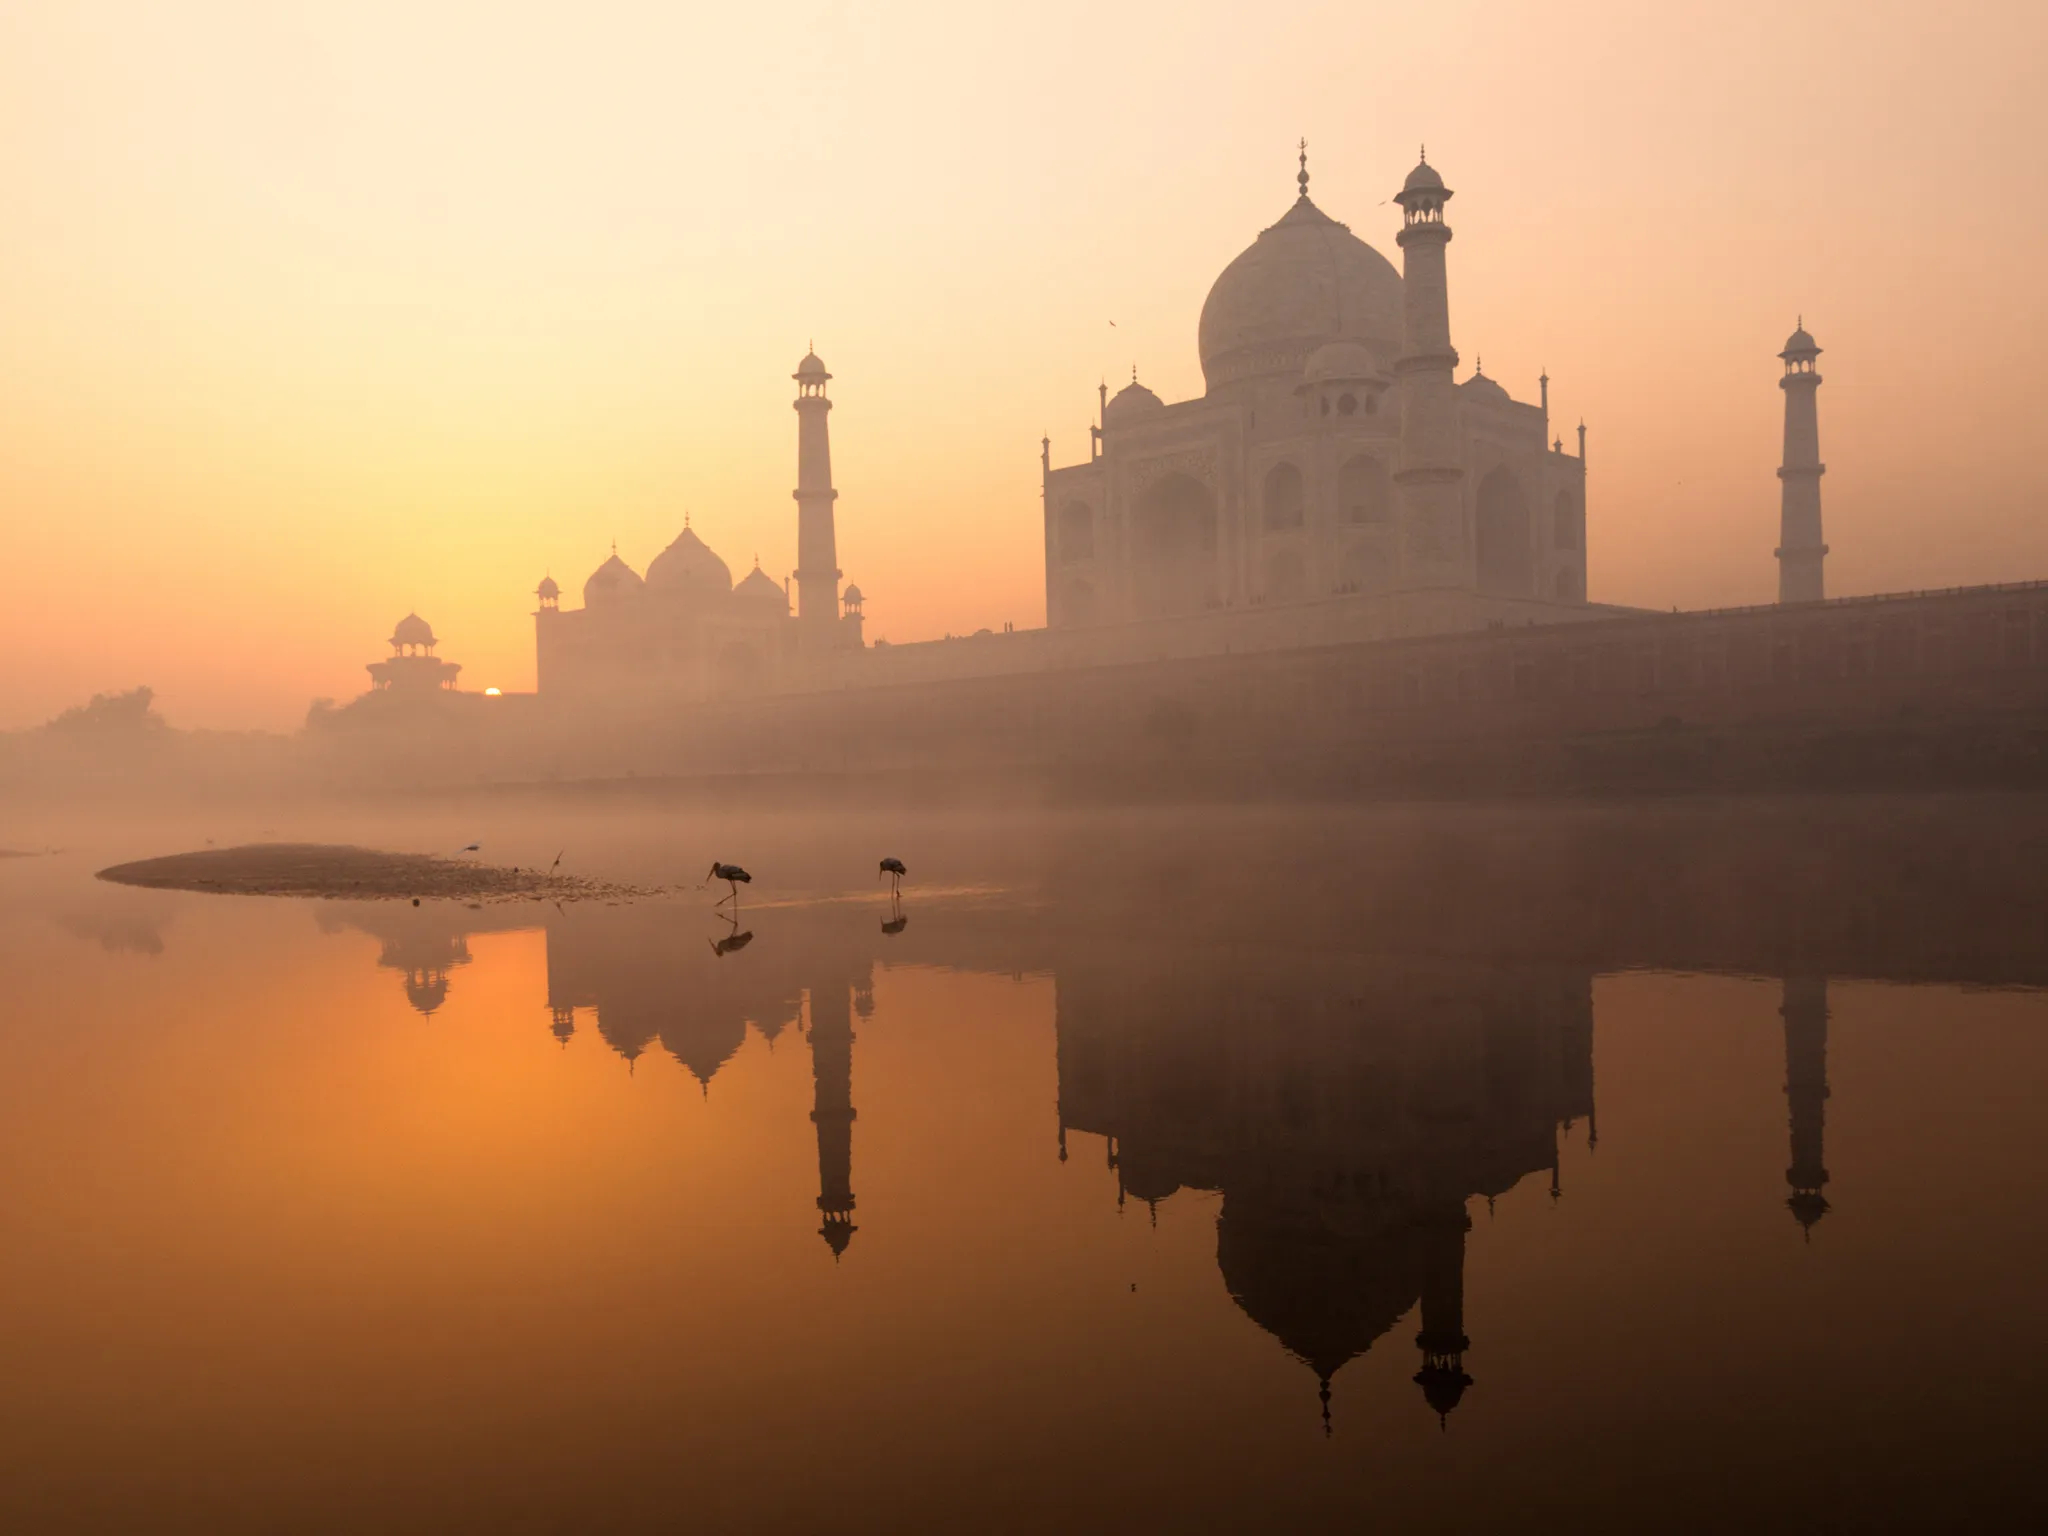 2048x1536 Air Pollution in India Is So Bad, You Can't See the Taj Mahal | Cond&Atilde;&copy; Nast Traveler